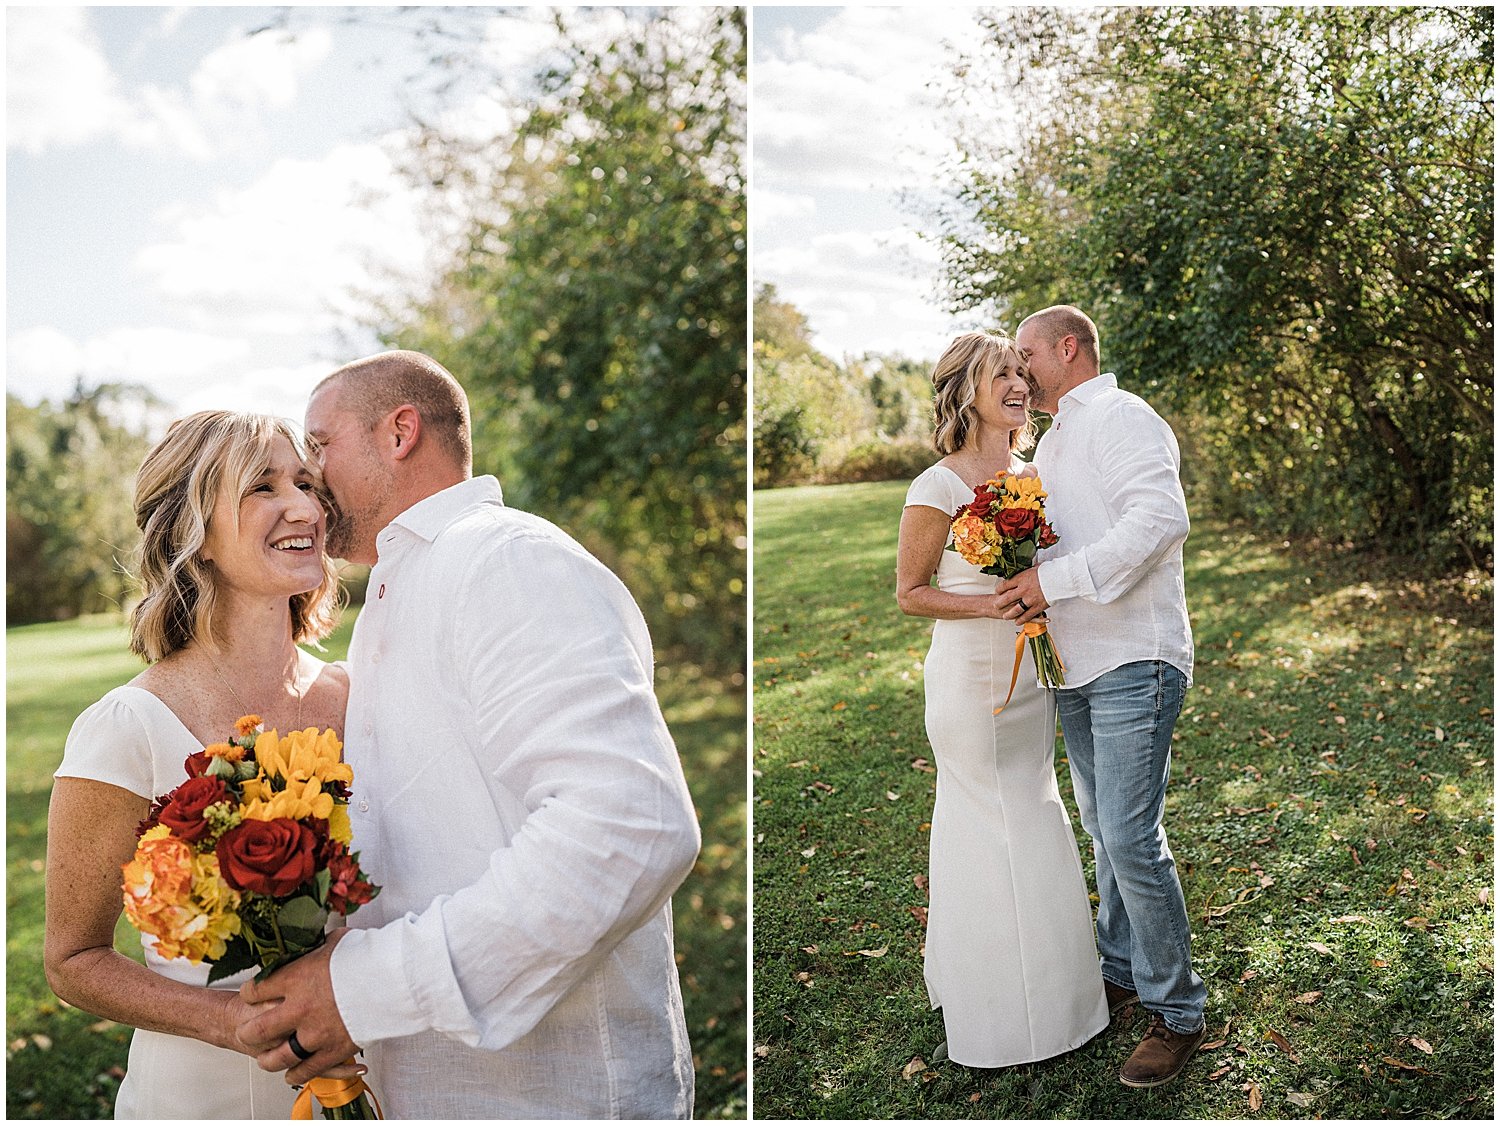 In-Home Elopement Ceremony &amp; Portraits | Yellowsprings, Ohio